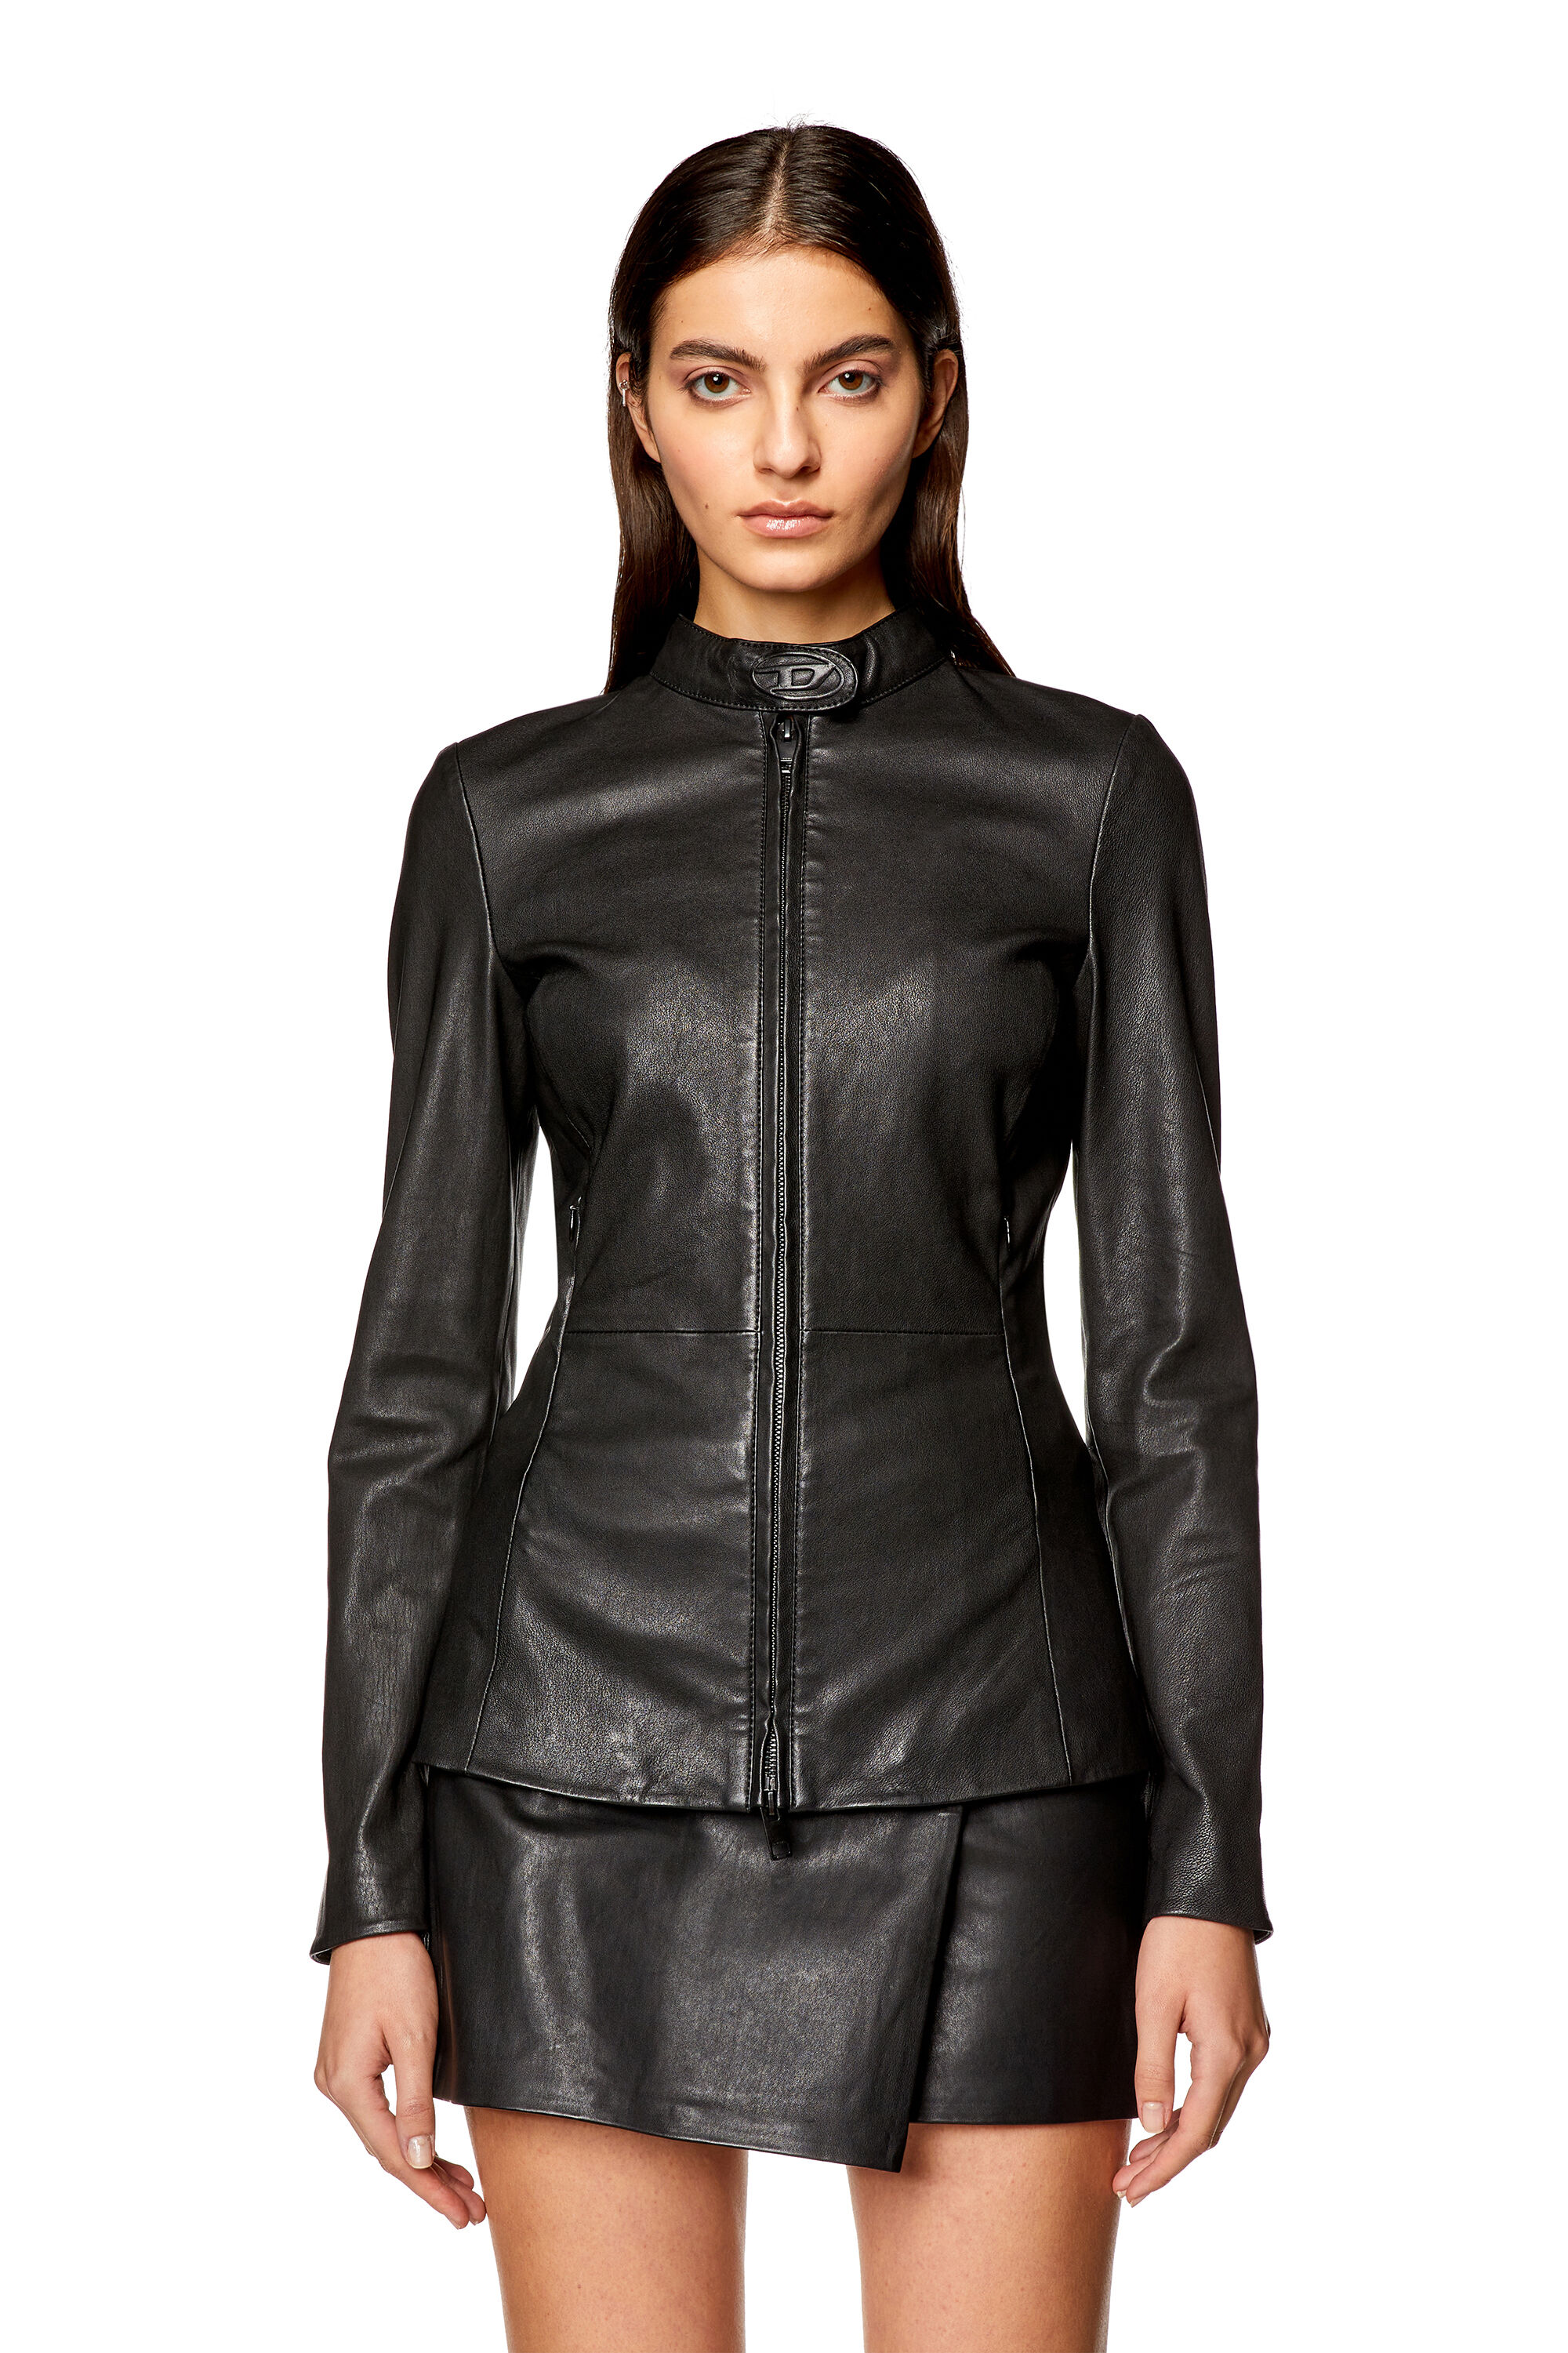 Diesel - L-SORY-N1, Donna Giacca in pelle stretch in Nero - Image 6